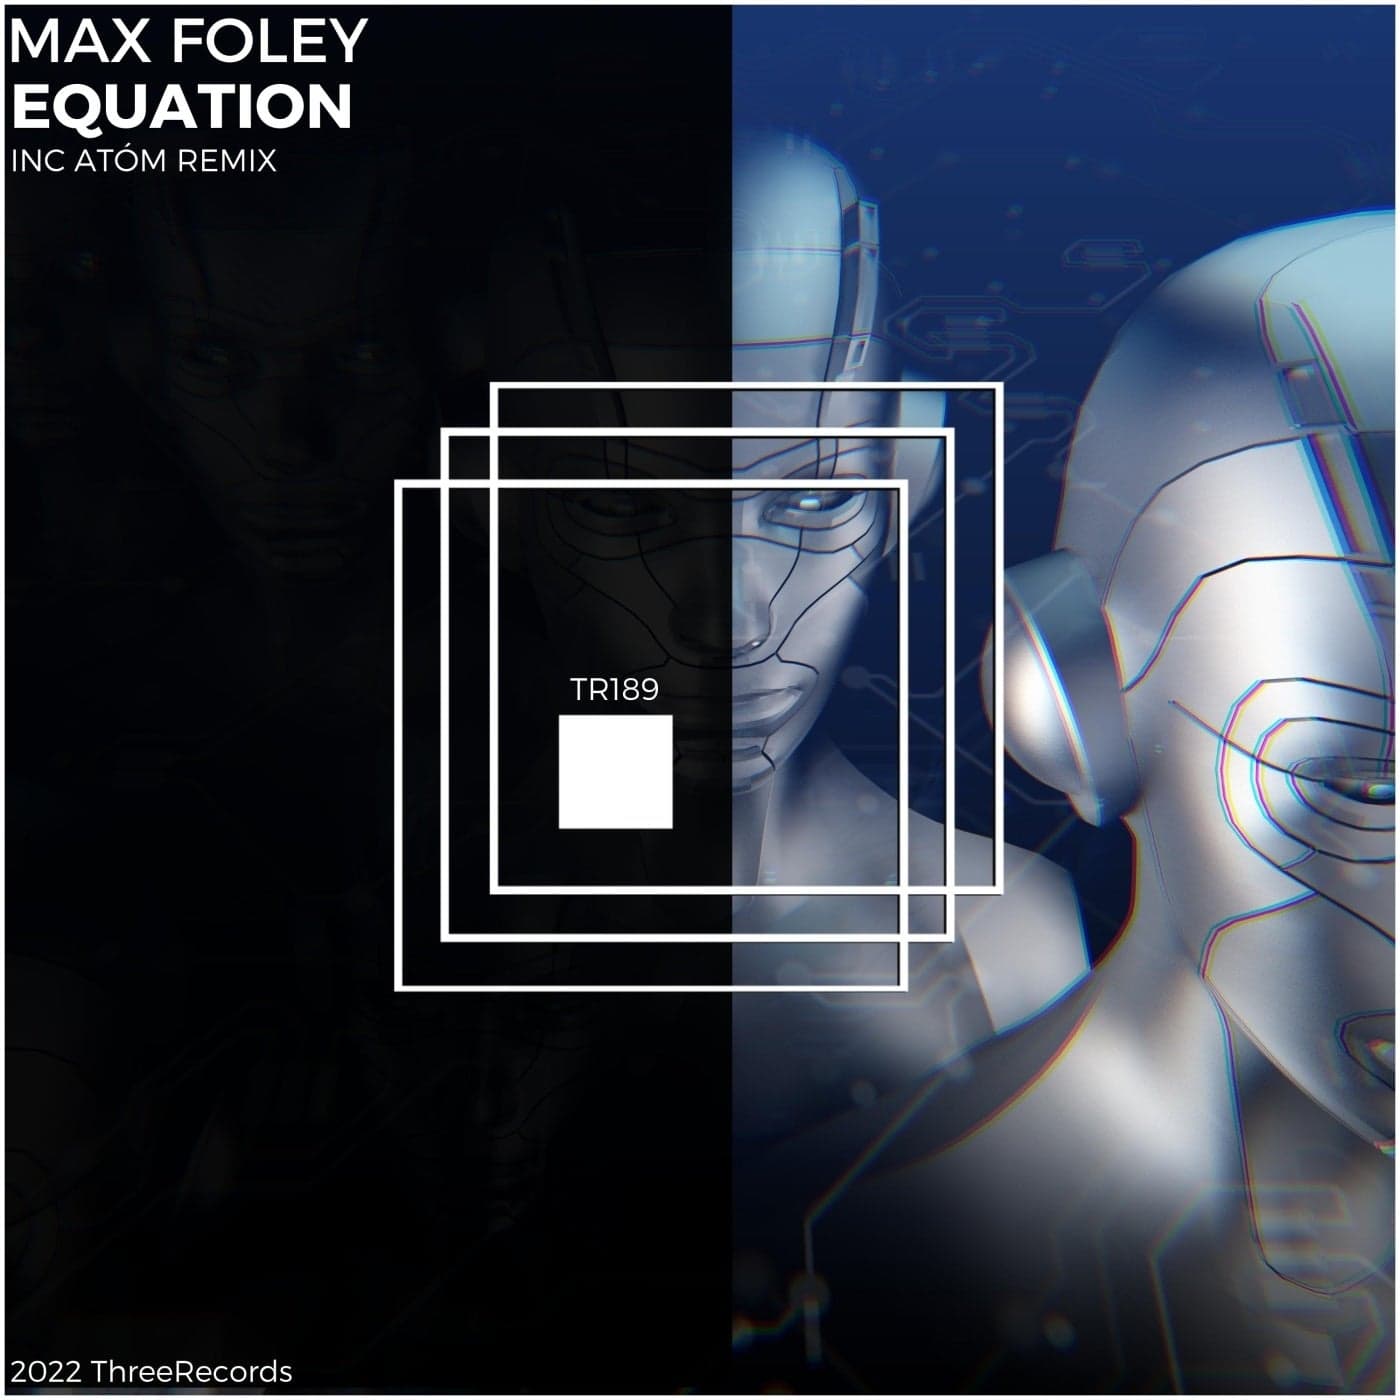 Download Max Foley - Equation on Electrobuzz